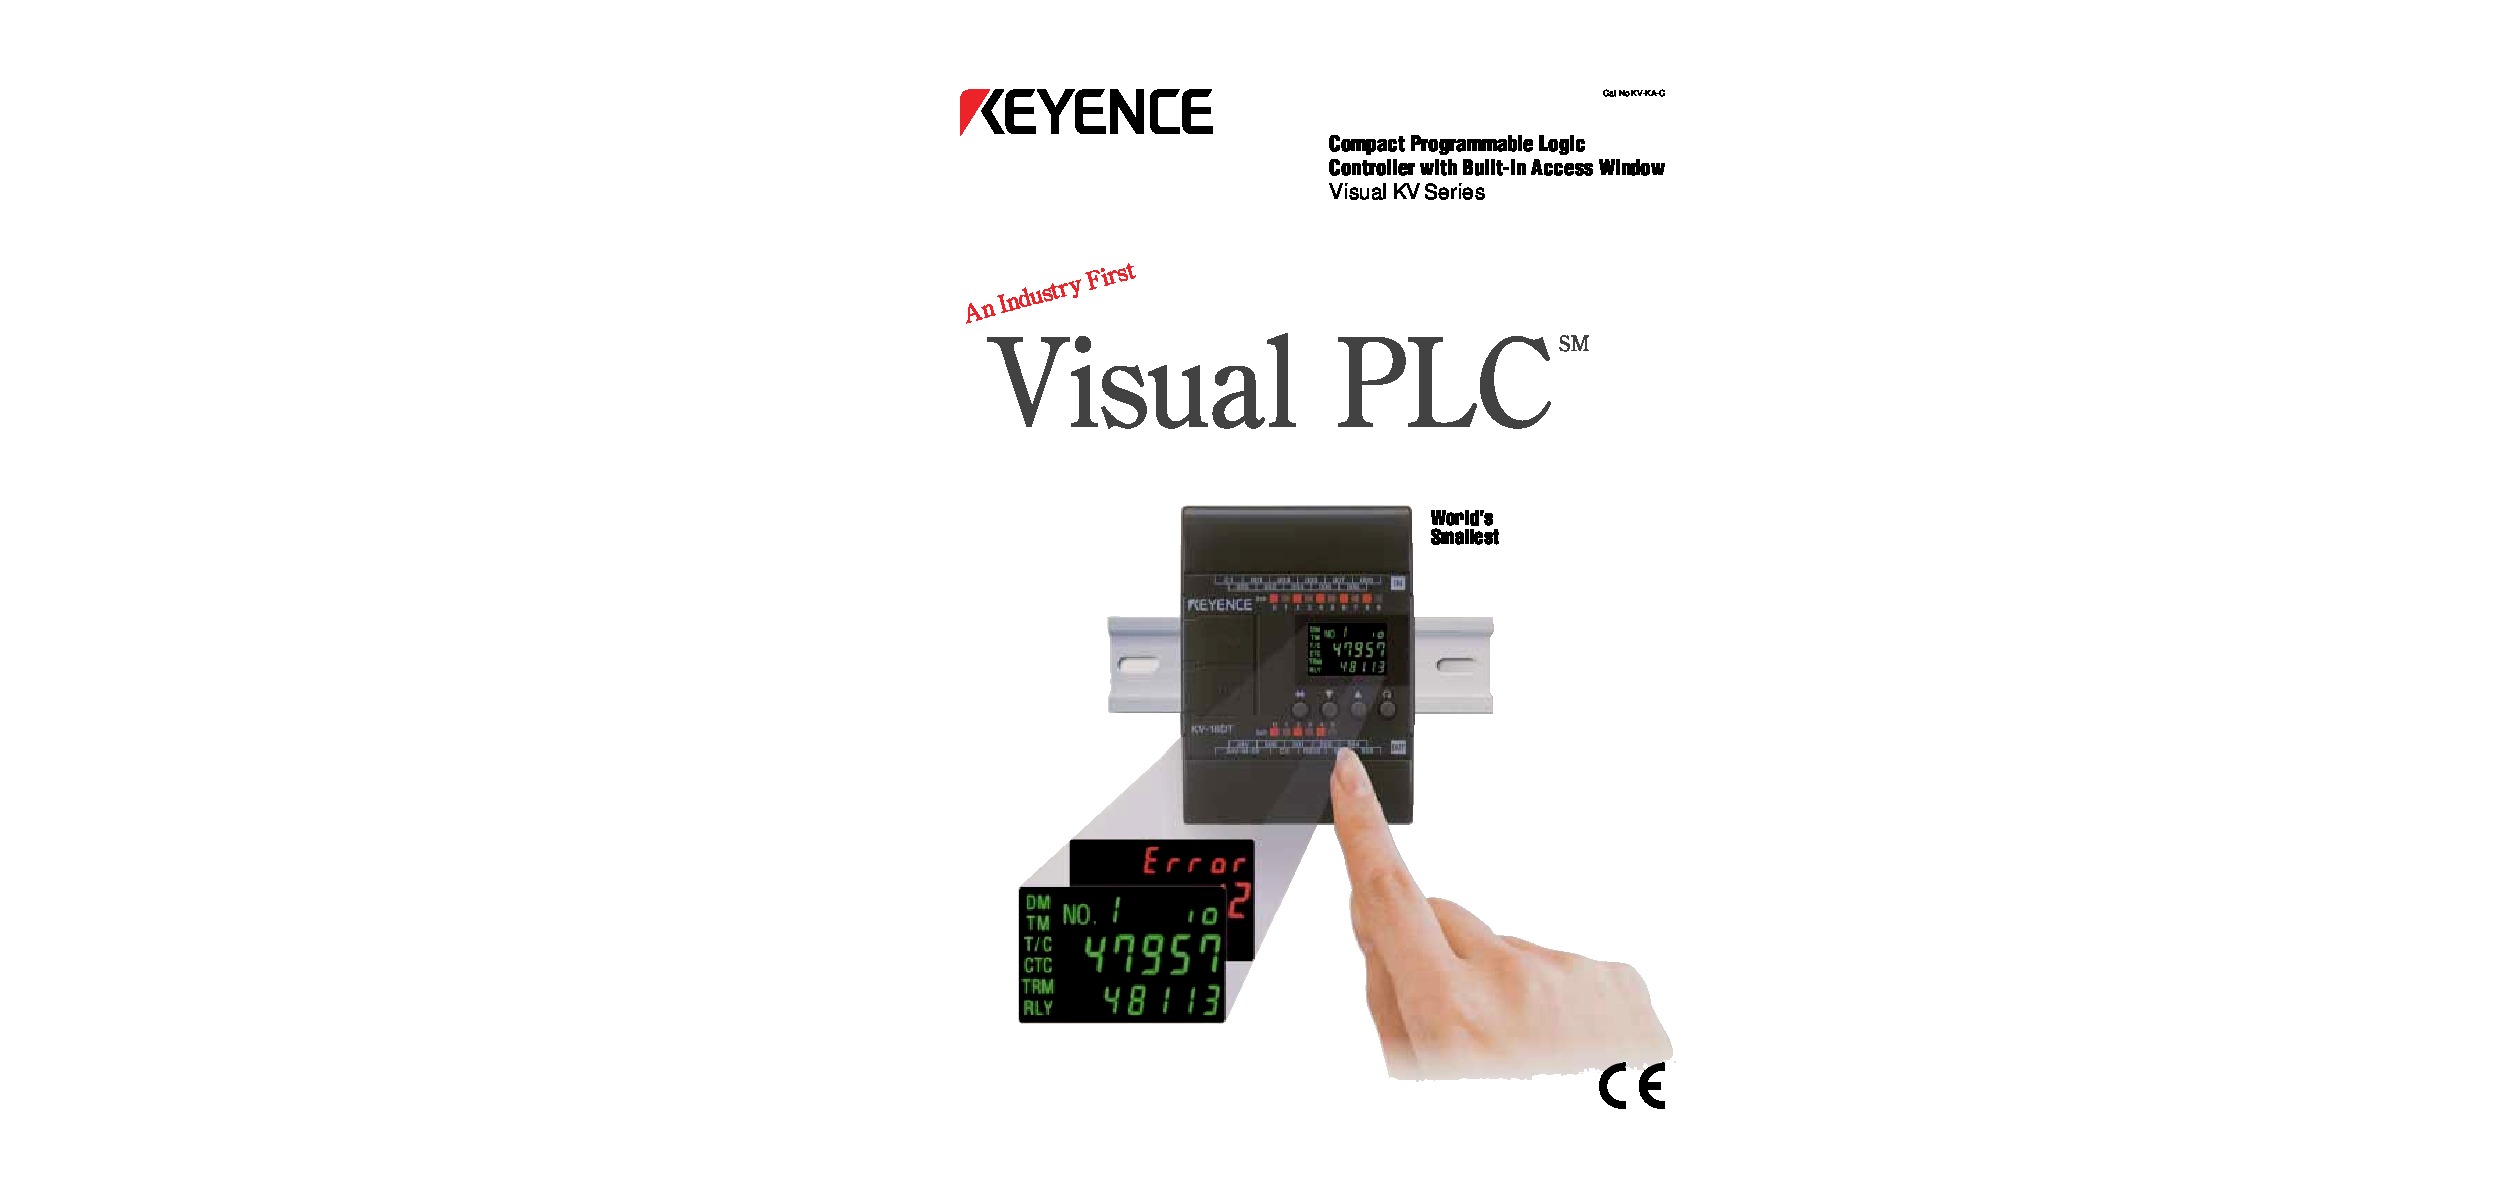 First Page Image of visualkvseries.pdf